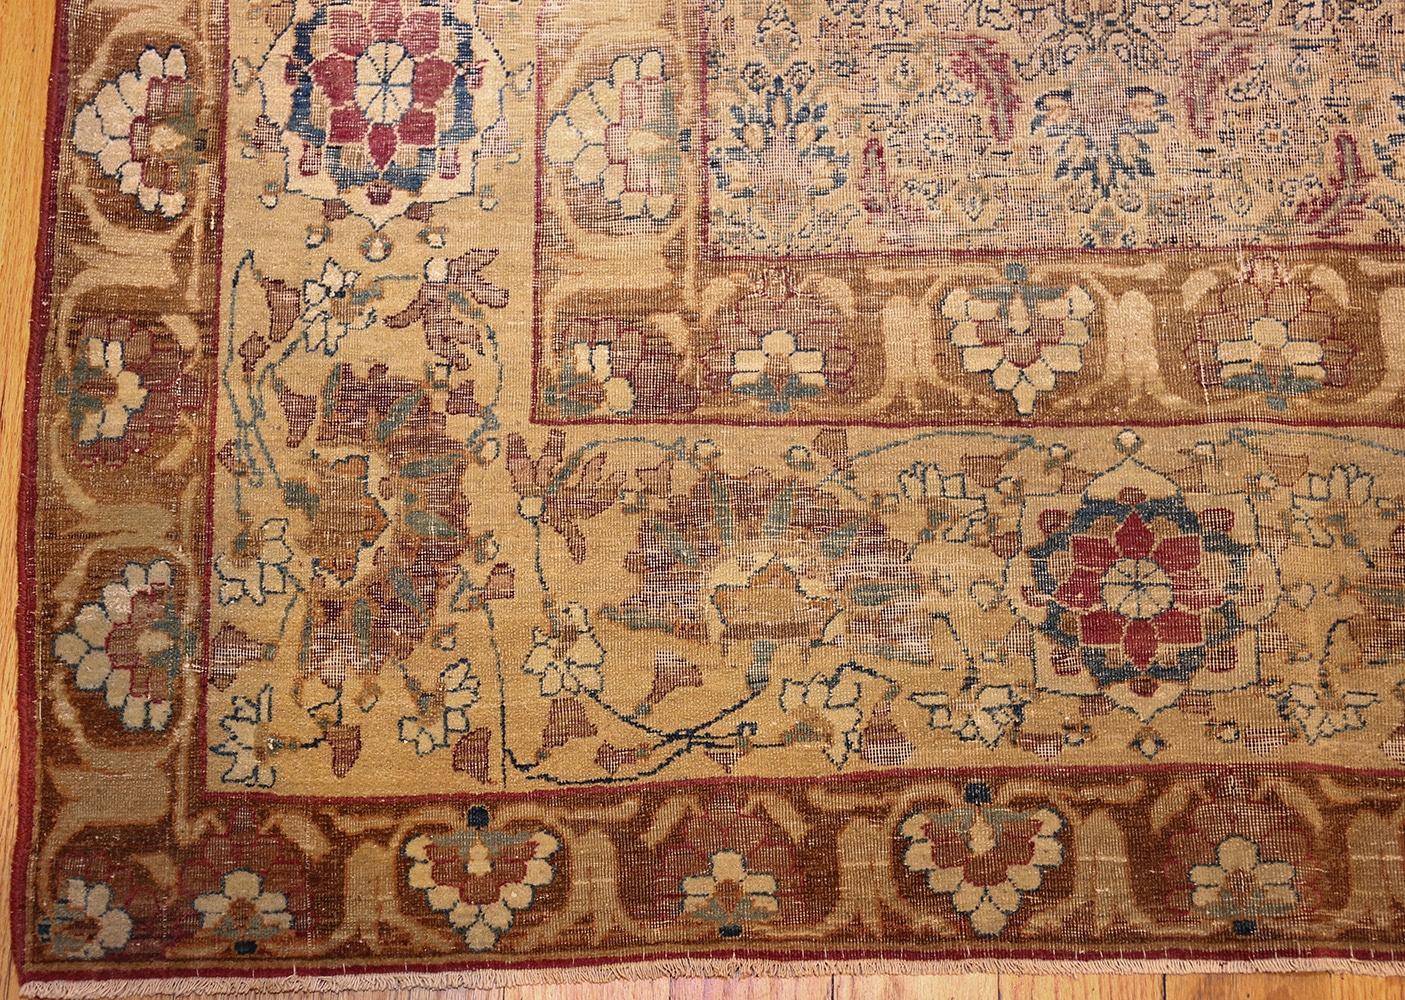 Hand-Knotted Small Rare Antique Persian Kerman Rug. Size: 5 ft x 7 ft (1.52 m x 2.13 m)